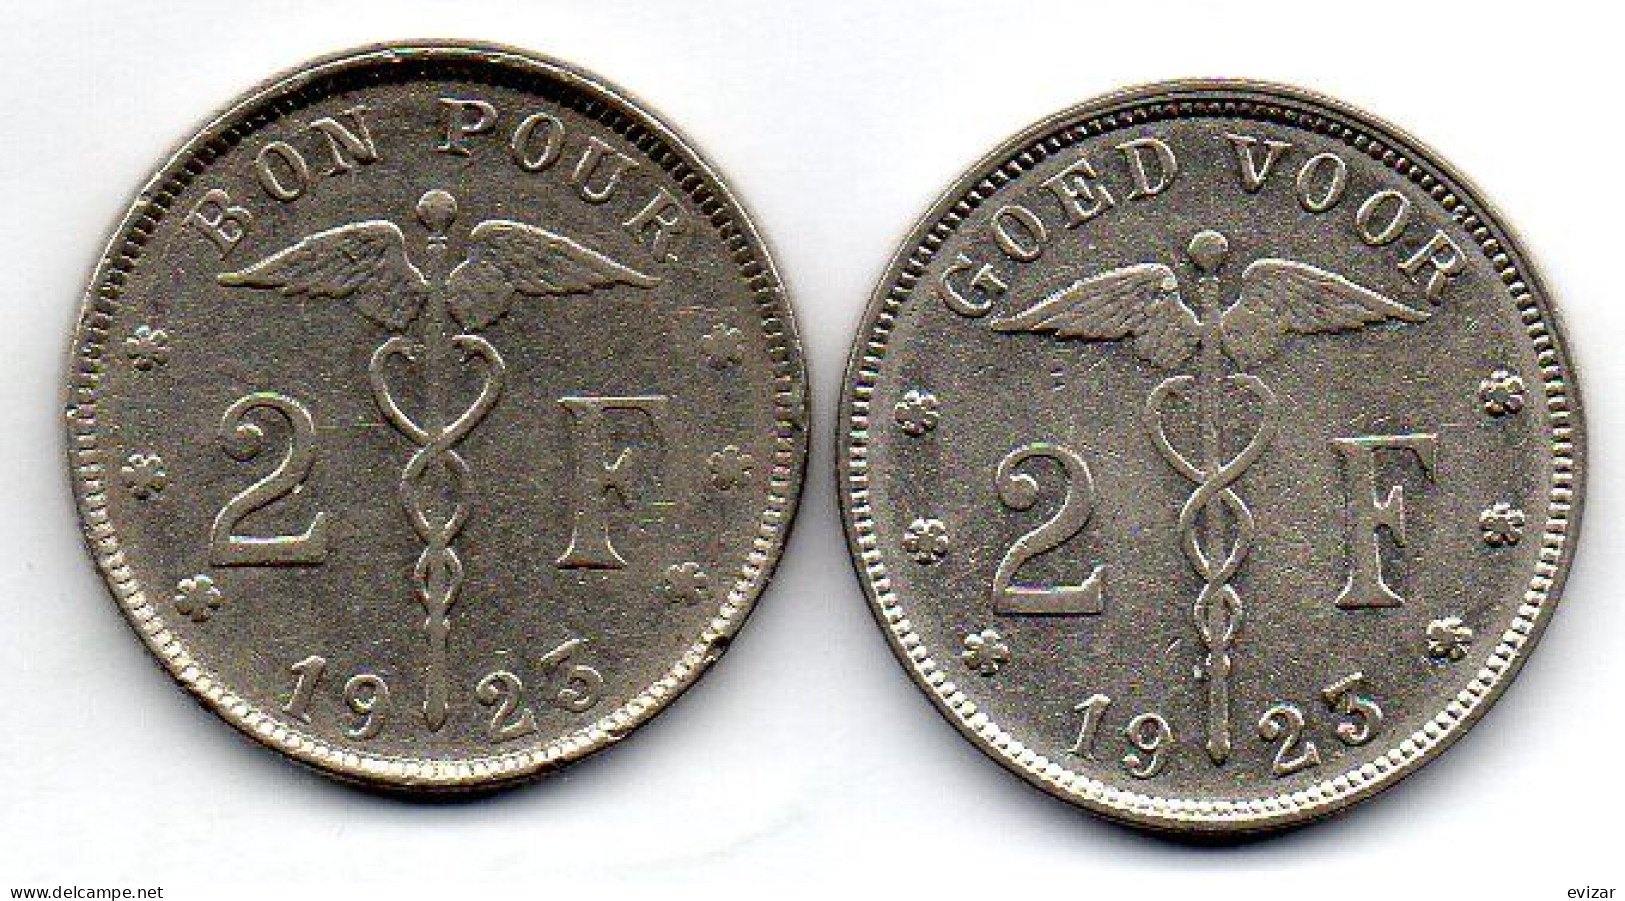 BELGIUM - Set Of Two Coins 2 Francs, Nickel, Year 1923, KM # 91.1, 92, French & Dutch Legend - 2 Franchi